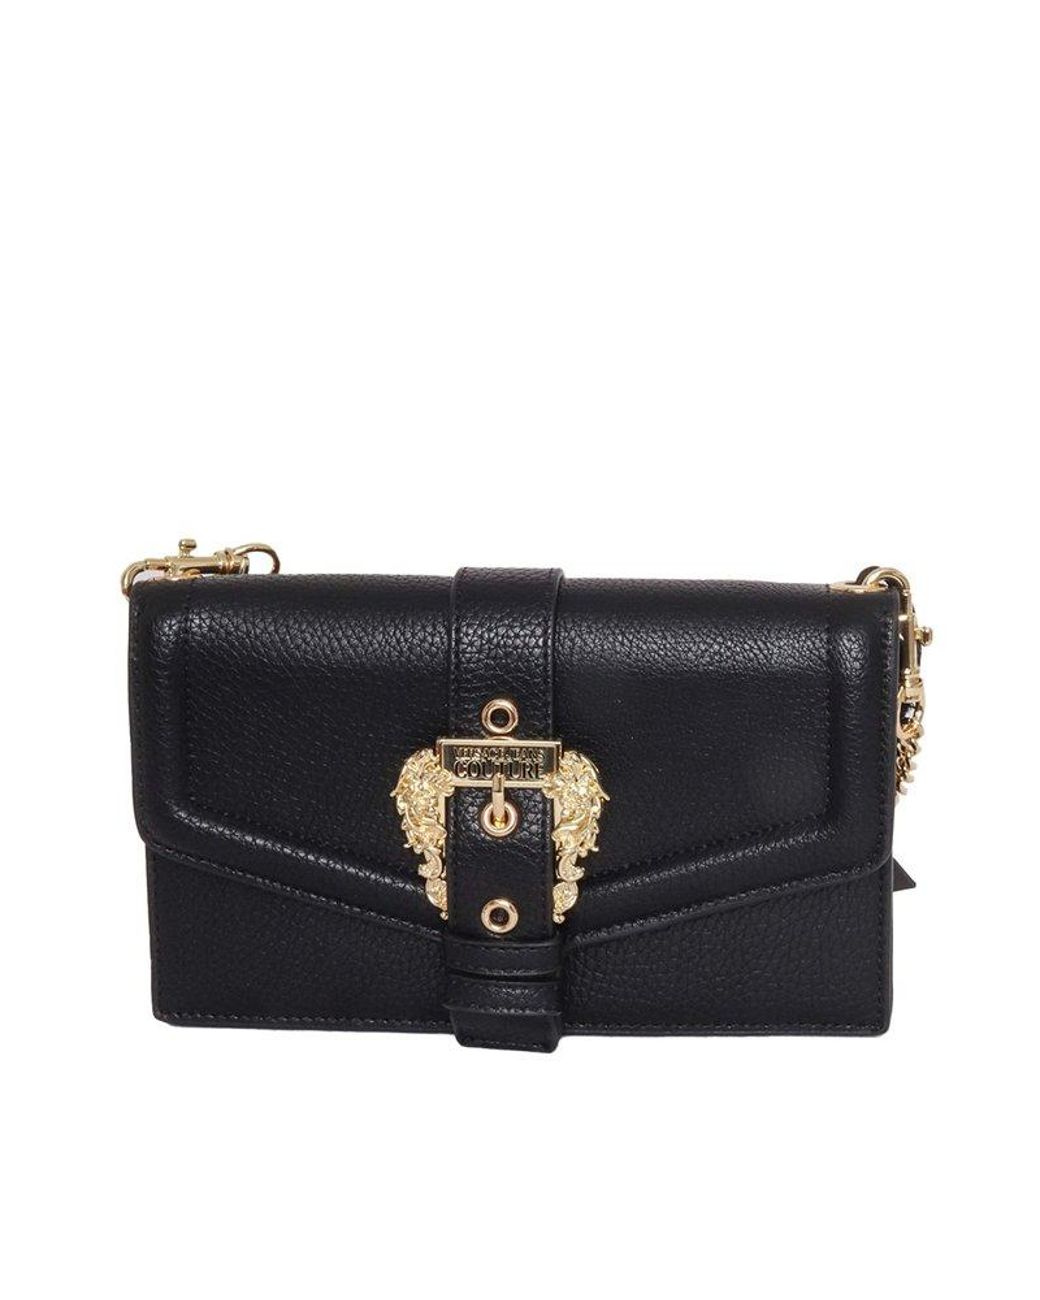 Versace Jeans Couture Couture 1 Shoulder Bag in Black | Lyst